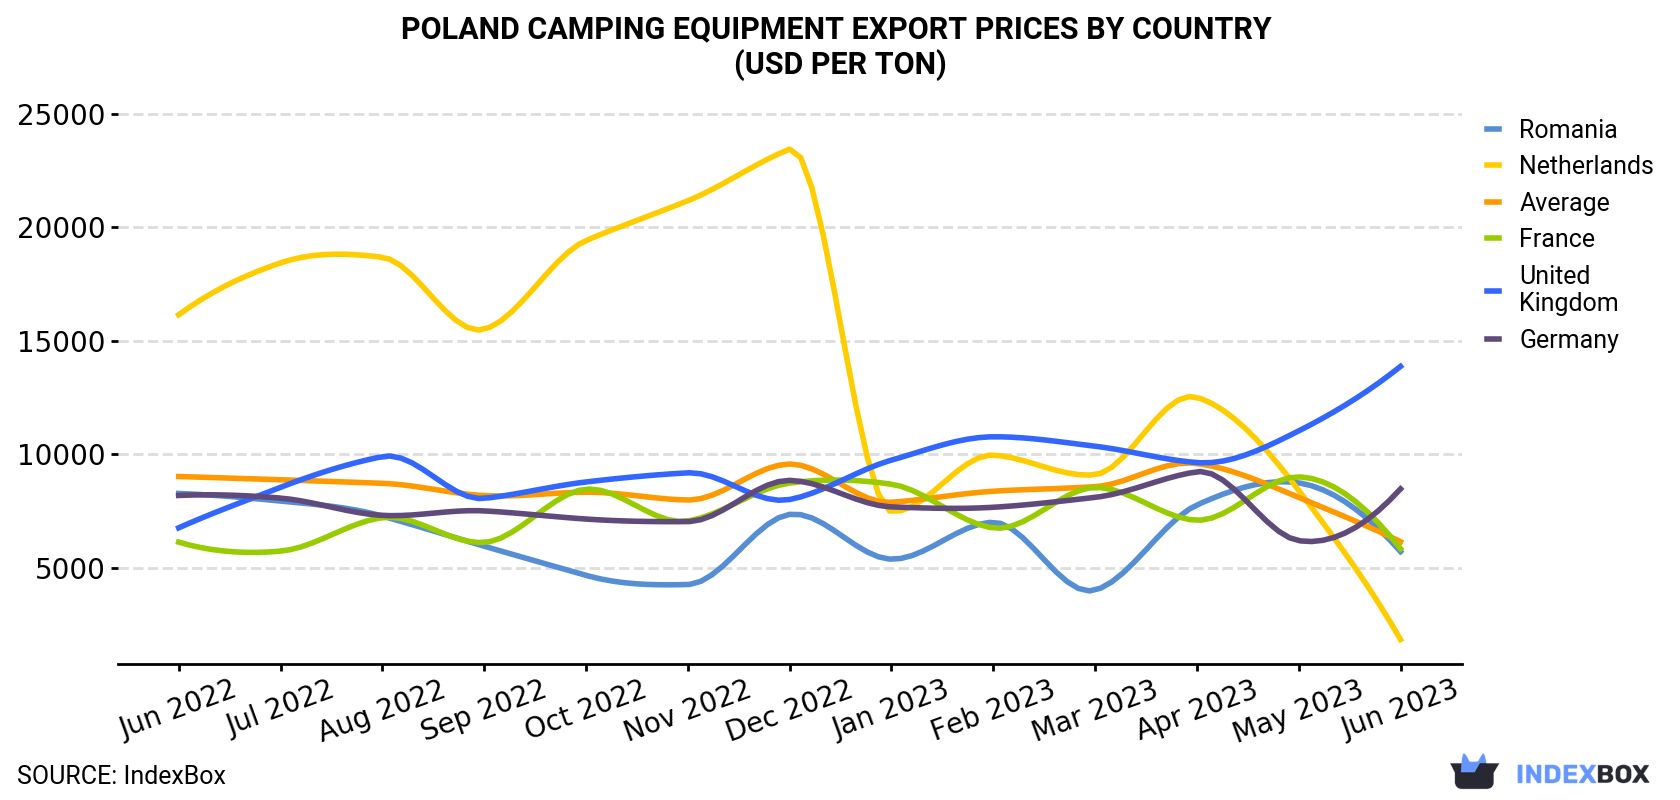 Poland Camping Equipment Export Prices By Country (USD Per Ton)